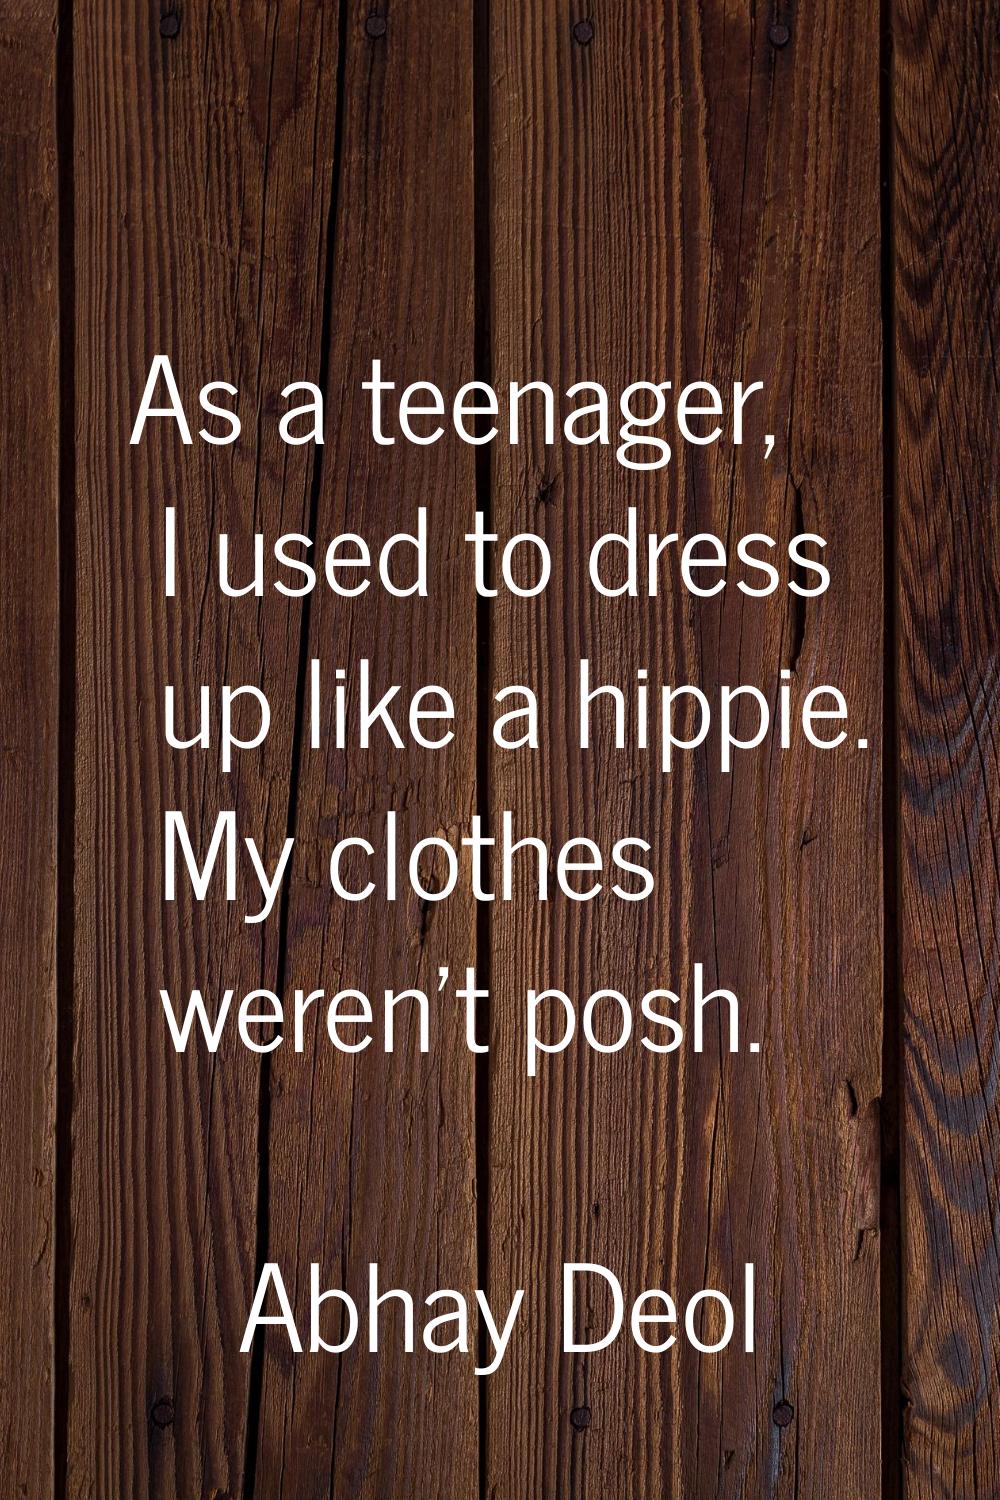 As a teenager, I used to dress up like a hippie. My clothes weren't posh.